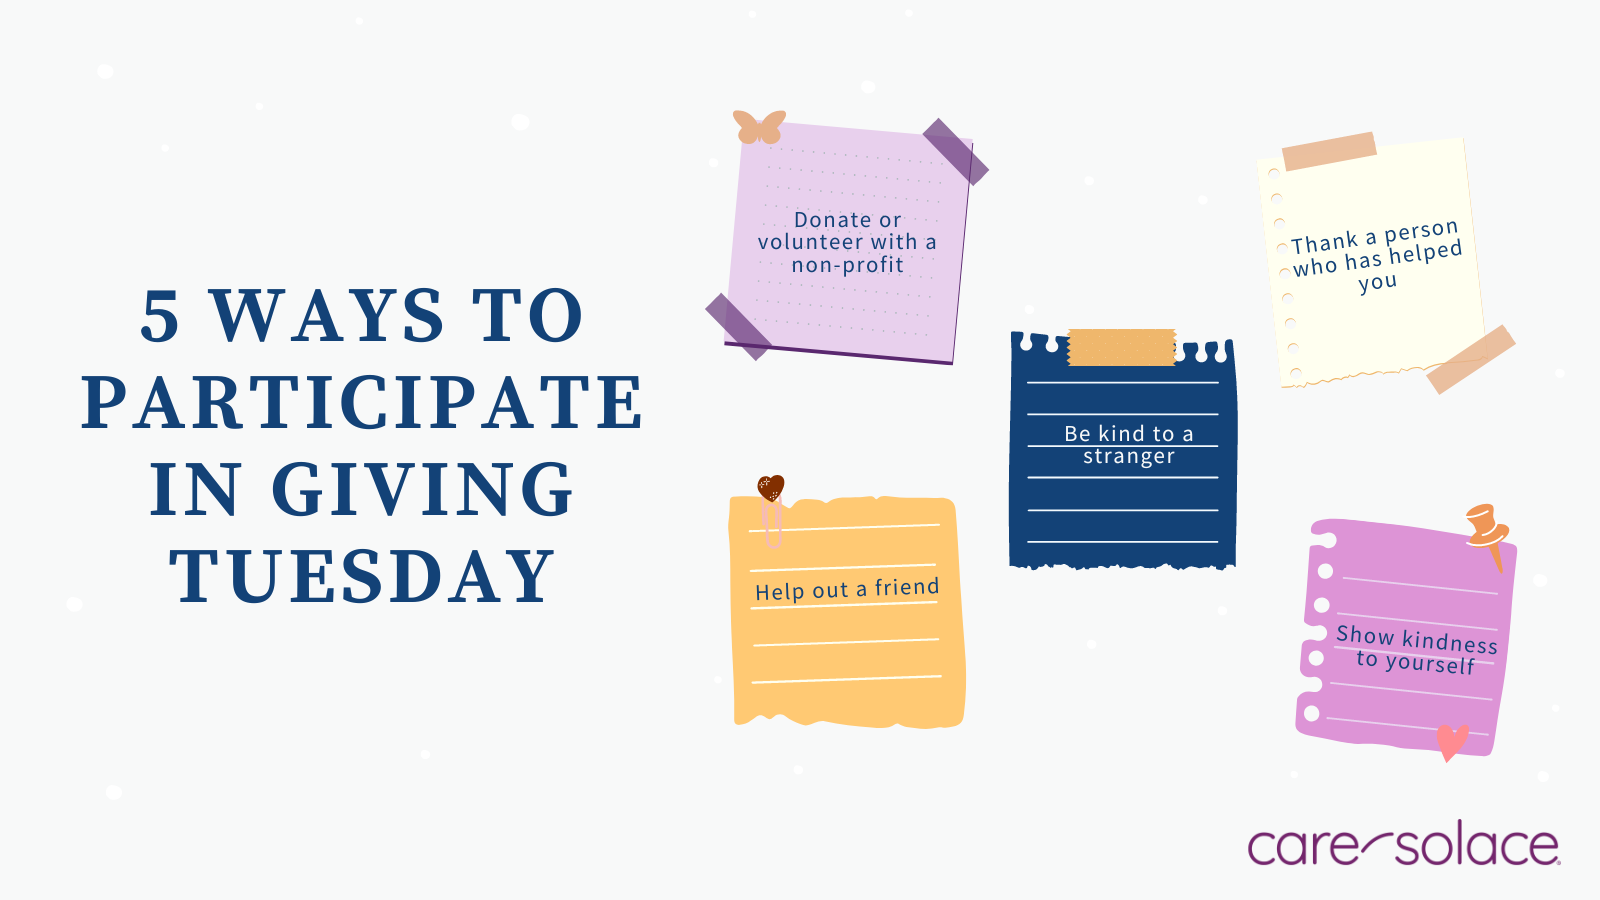 5 ways to participate in giving Tuesday